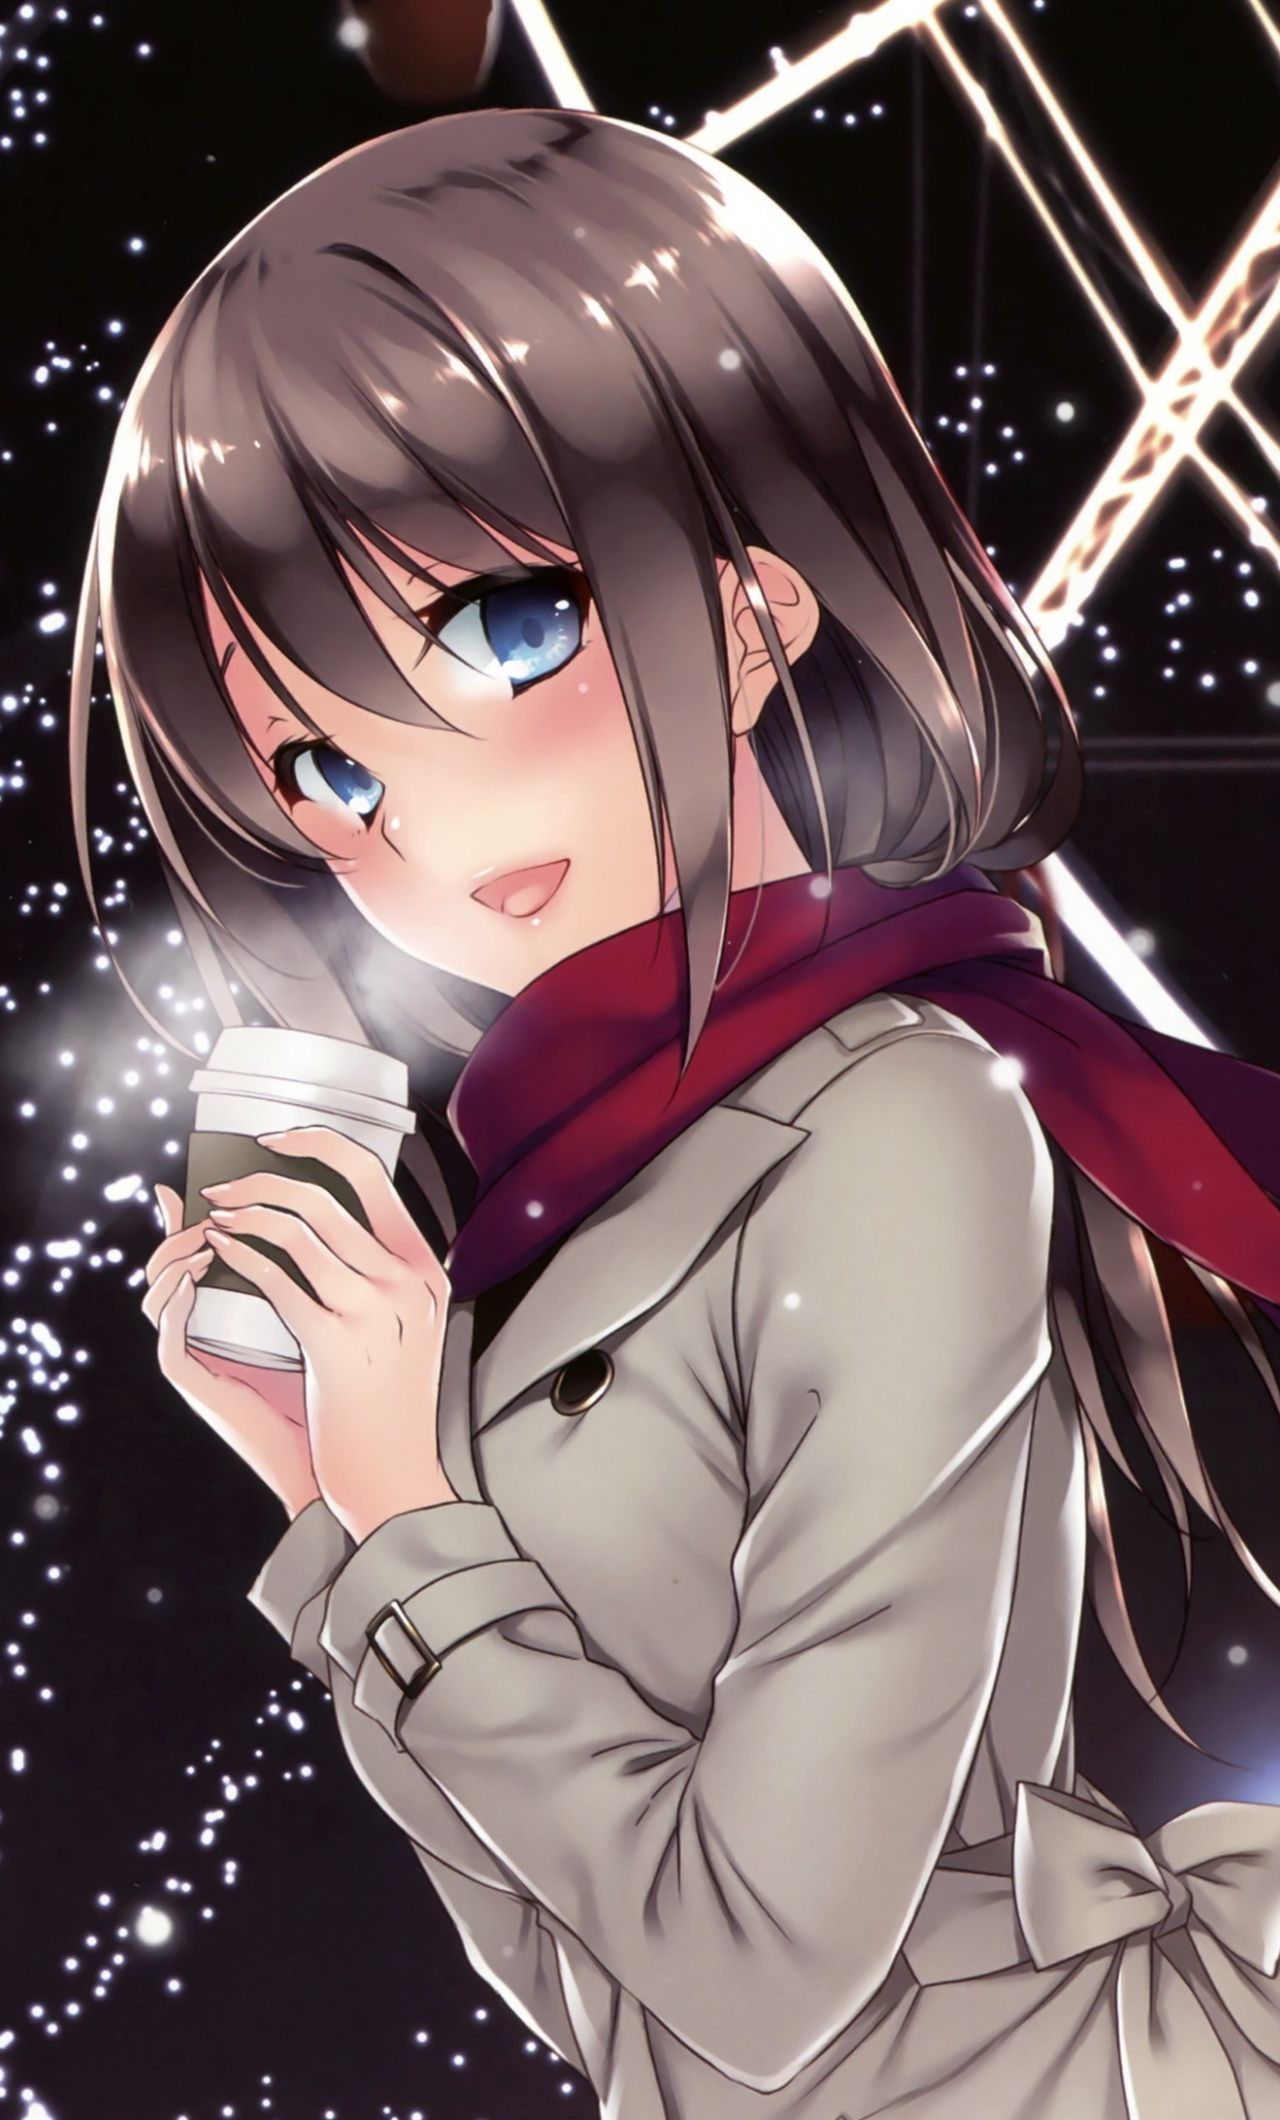 Cute Anime Girls Drinking Coffee Wallpapers Wallpaper Cave